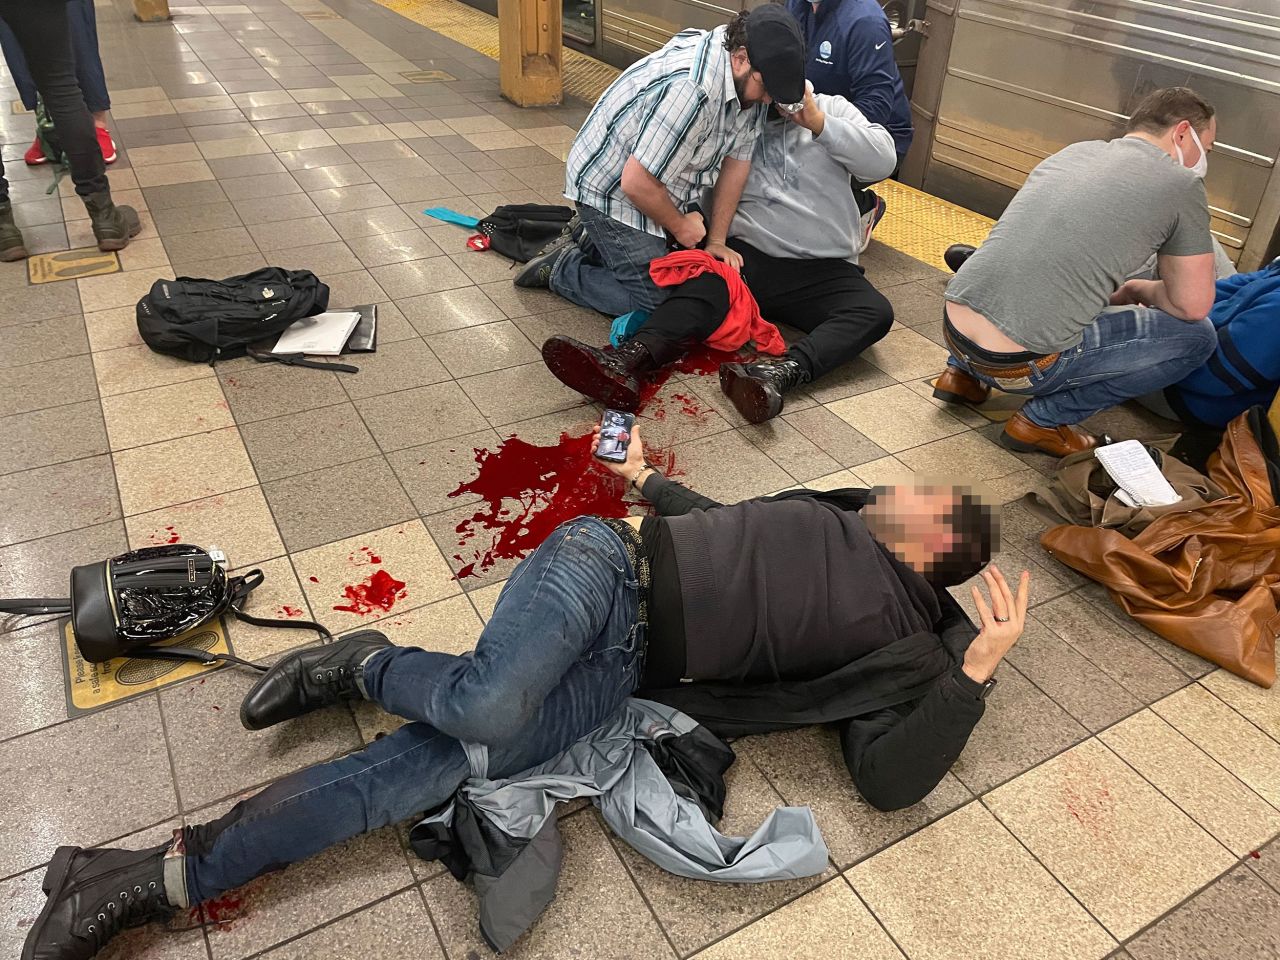 Injured people are seen on the platform of the 36th Street subway station on Tuesday. This photo was taken by photojournalist Derek French, who told CNN he leveraged his Red Cross first aid training to help victims. While helping them, French also discovered that he himself had been shot in the ankle and was bleeding. <strong><em>Editor's note:</em></strong><em> A blur has been applied here by CNN to protect the identity of the victim.</em>